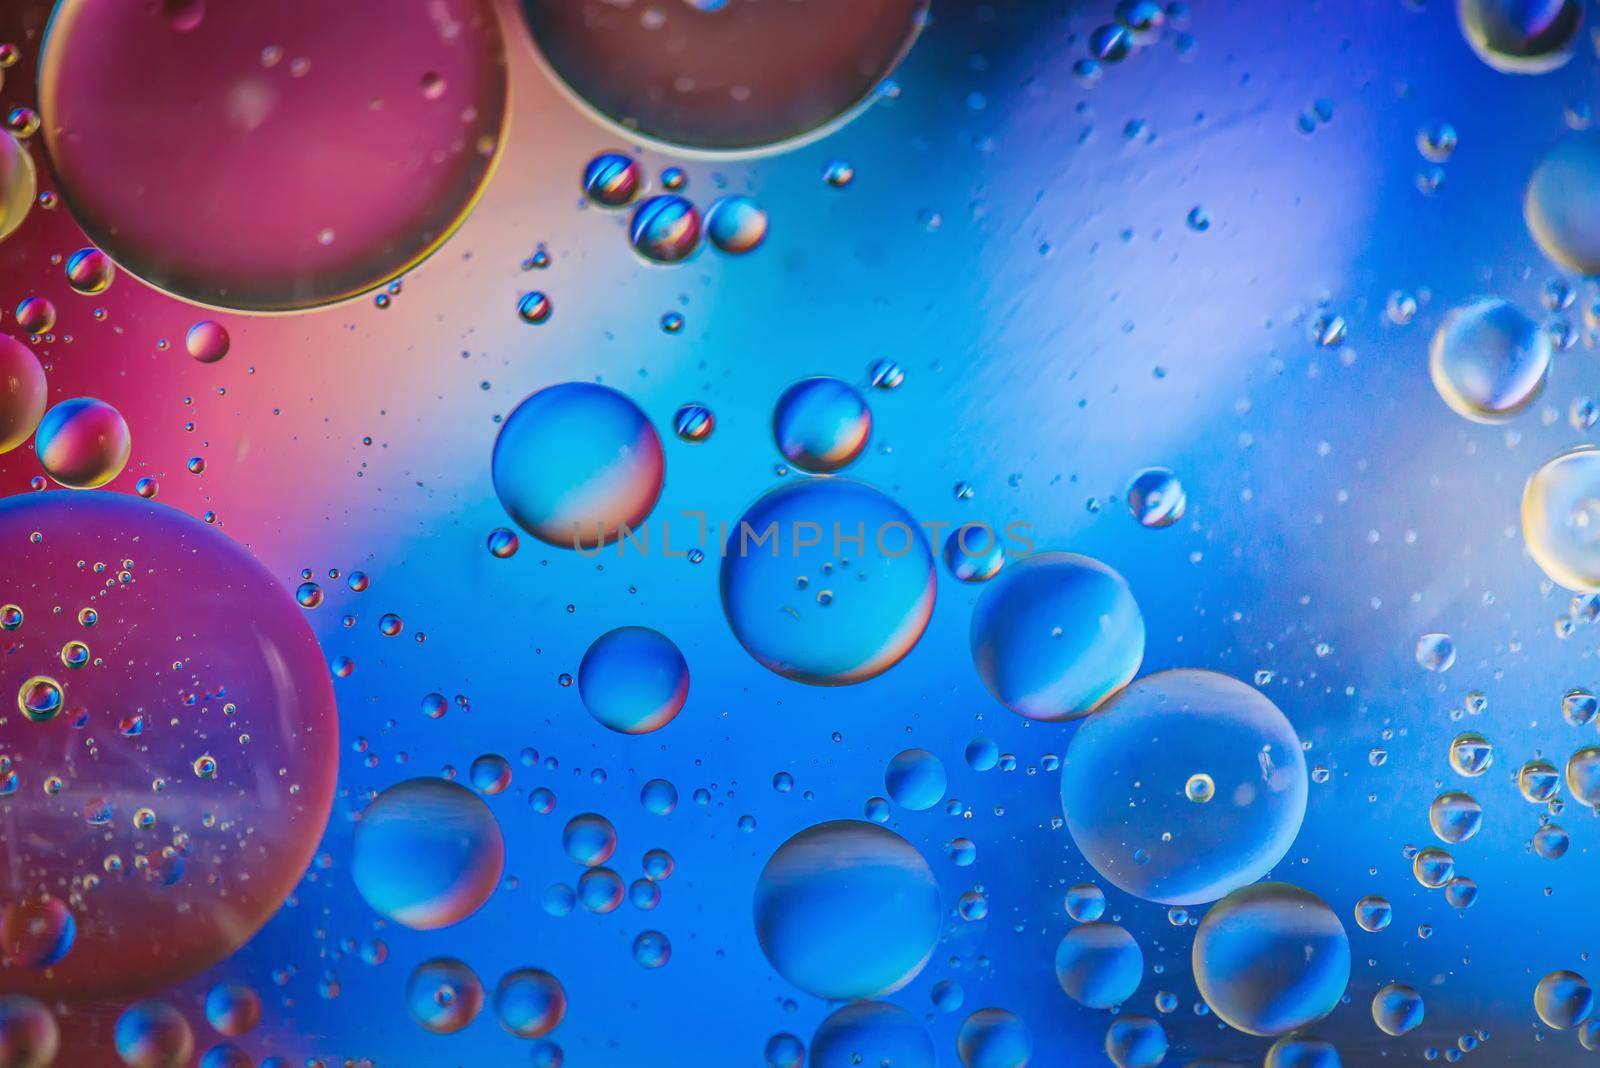 Multicolored abstract defocused background picture made with oil, water and soap by anytka